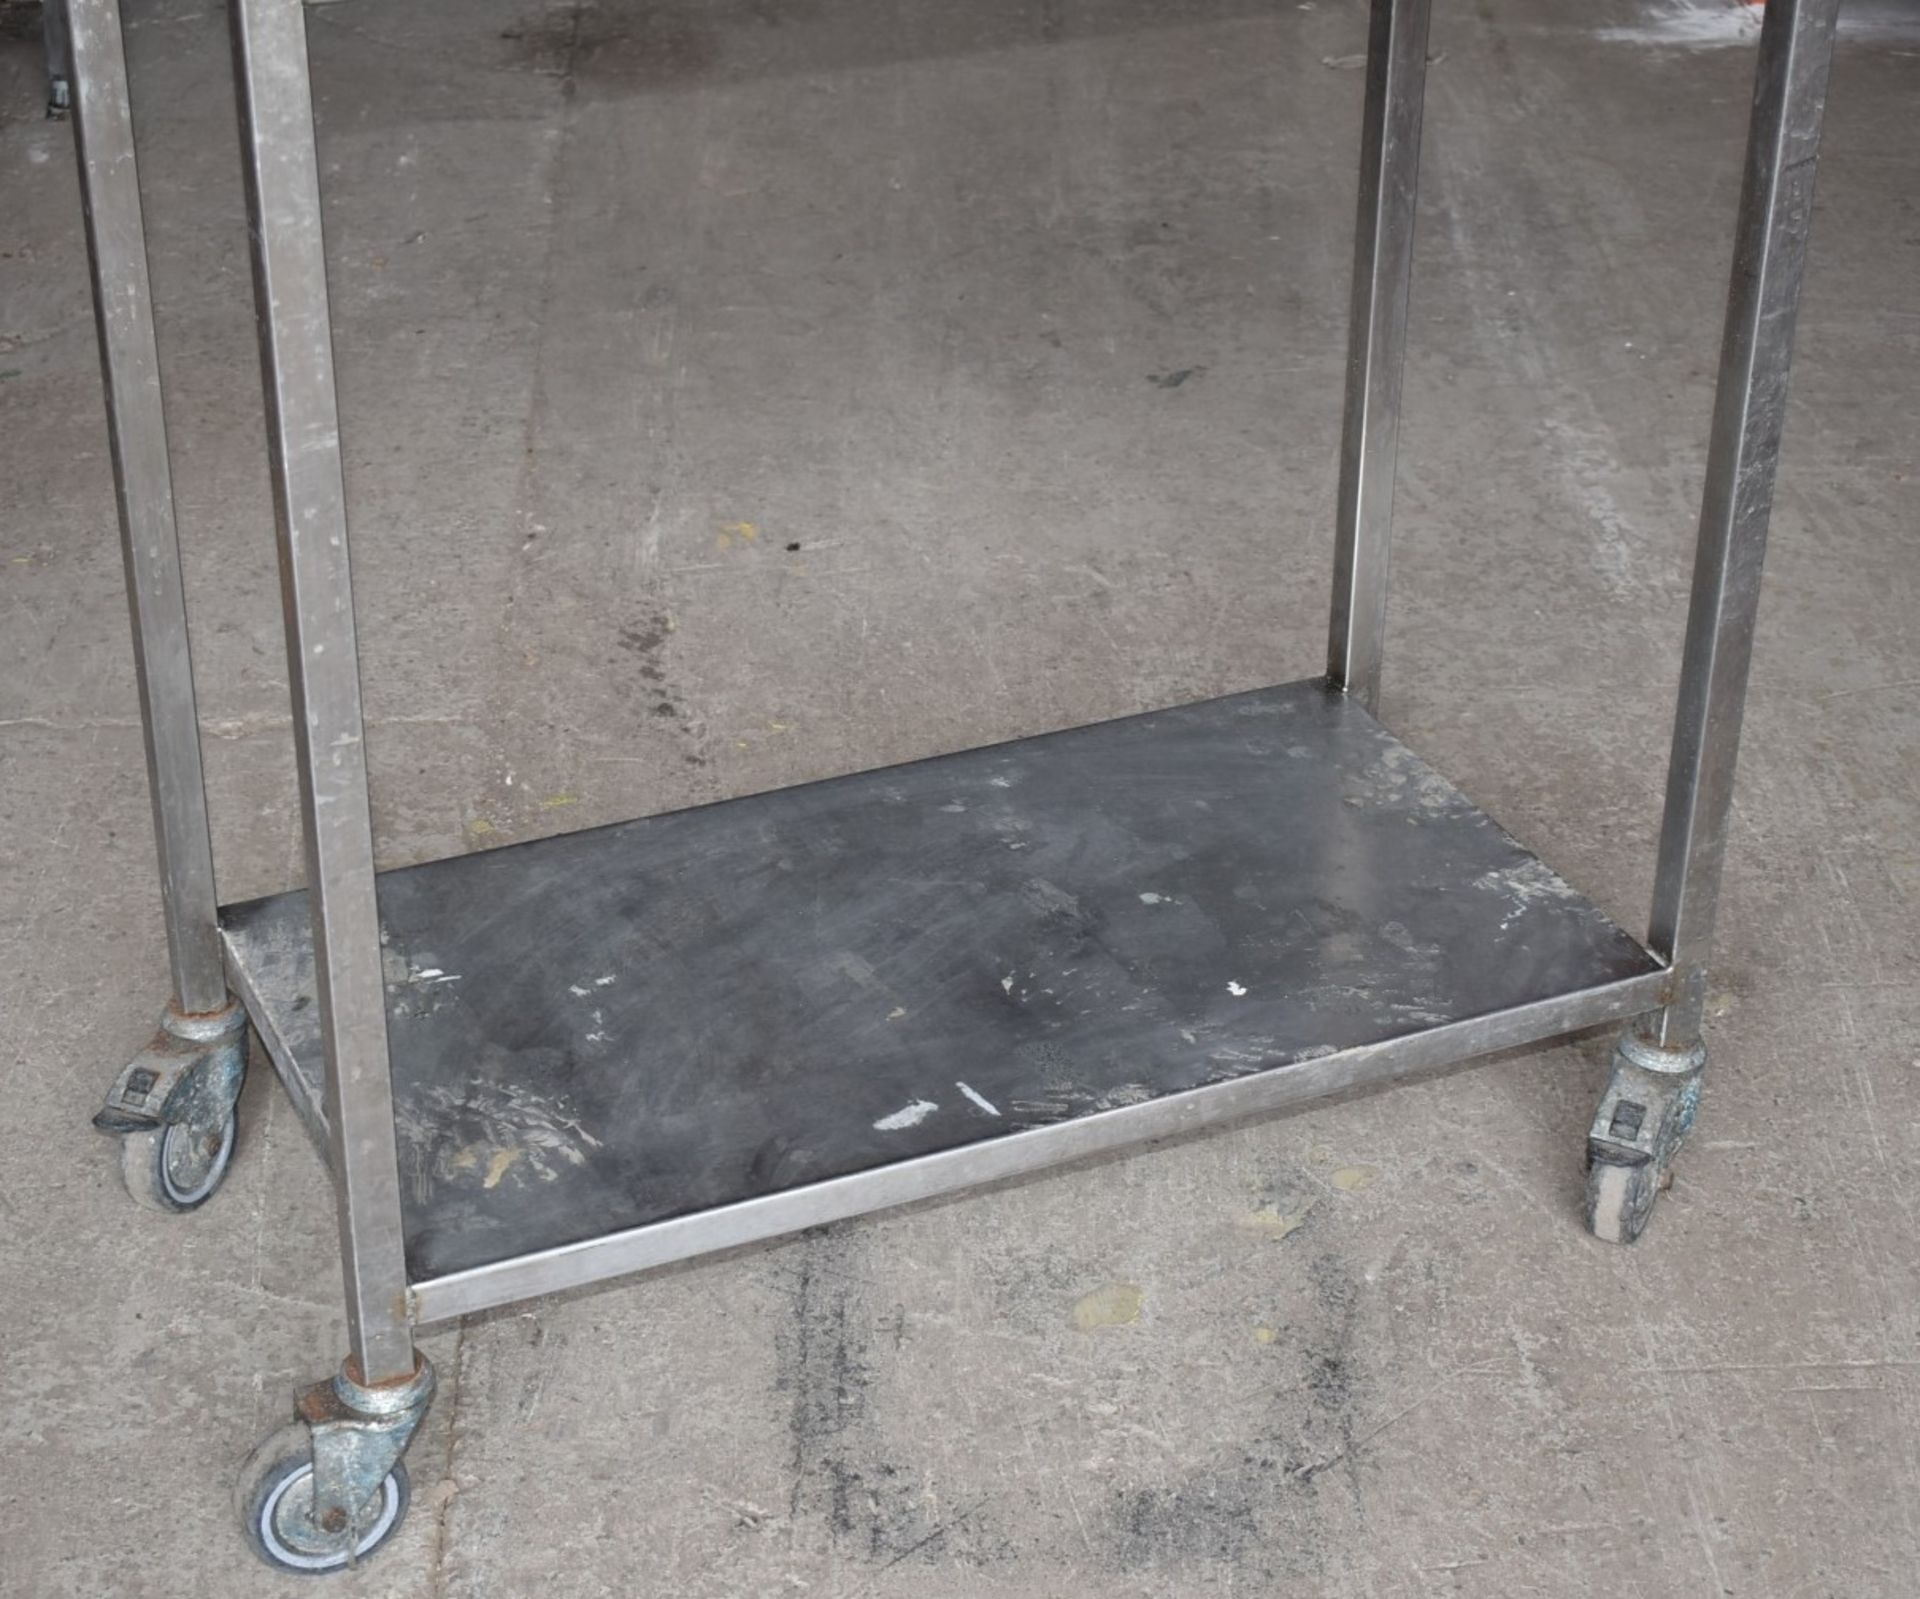 1 x Stainless Steel Two Tier Shelf Unit With Castor Wheels - Dimensions: H170 x W90 x D45 cms - - Image 5 of 10